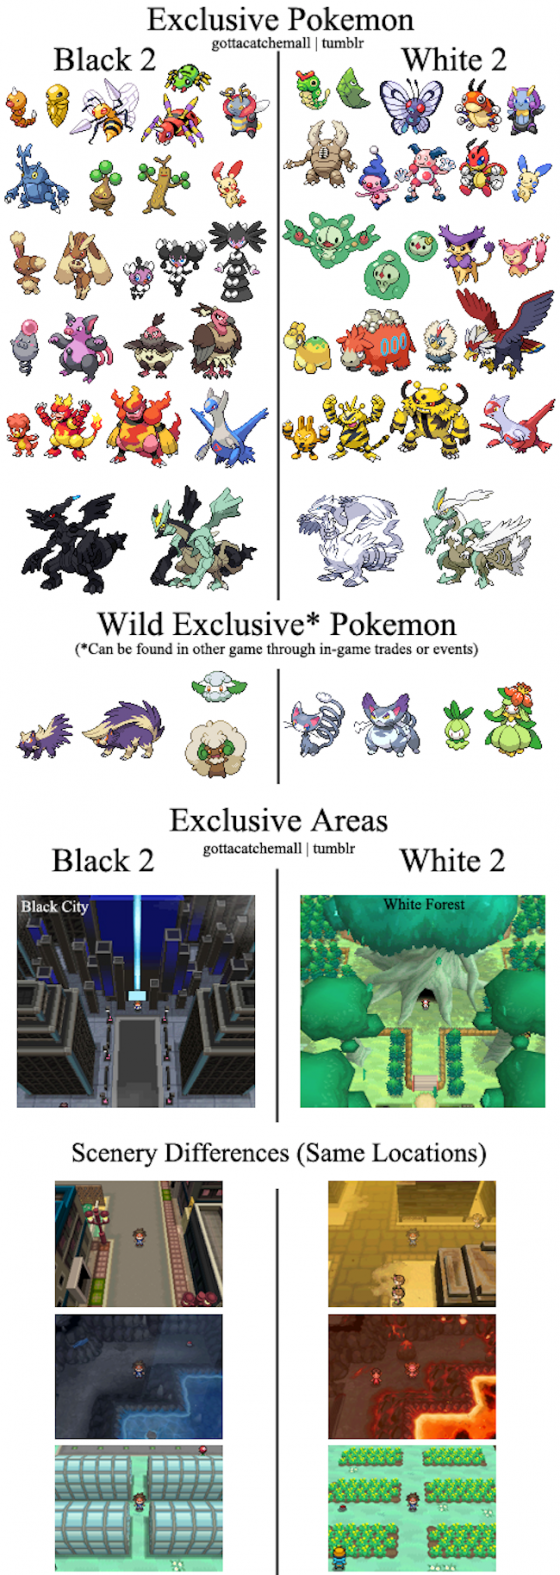 Pokemon Black And White 2 Difference